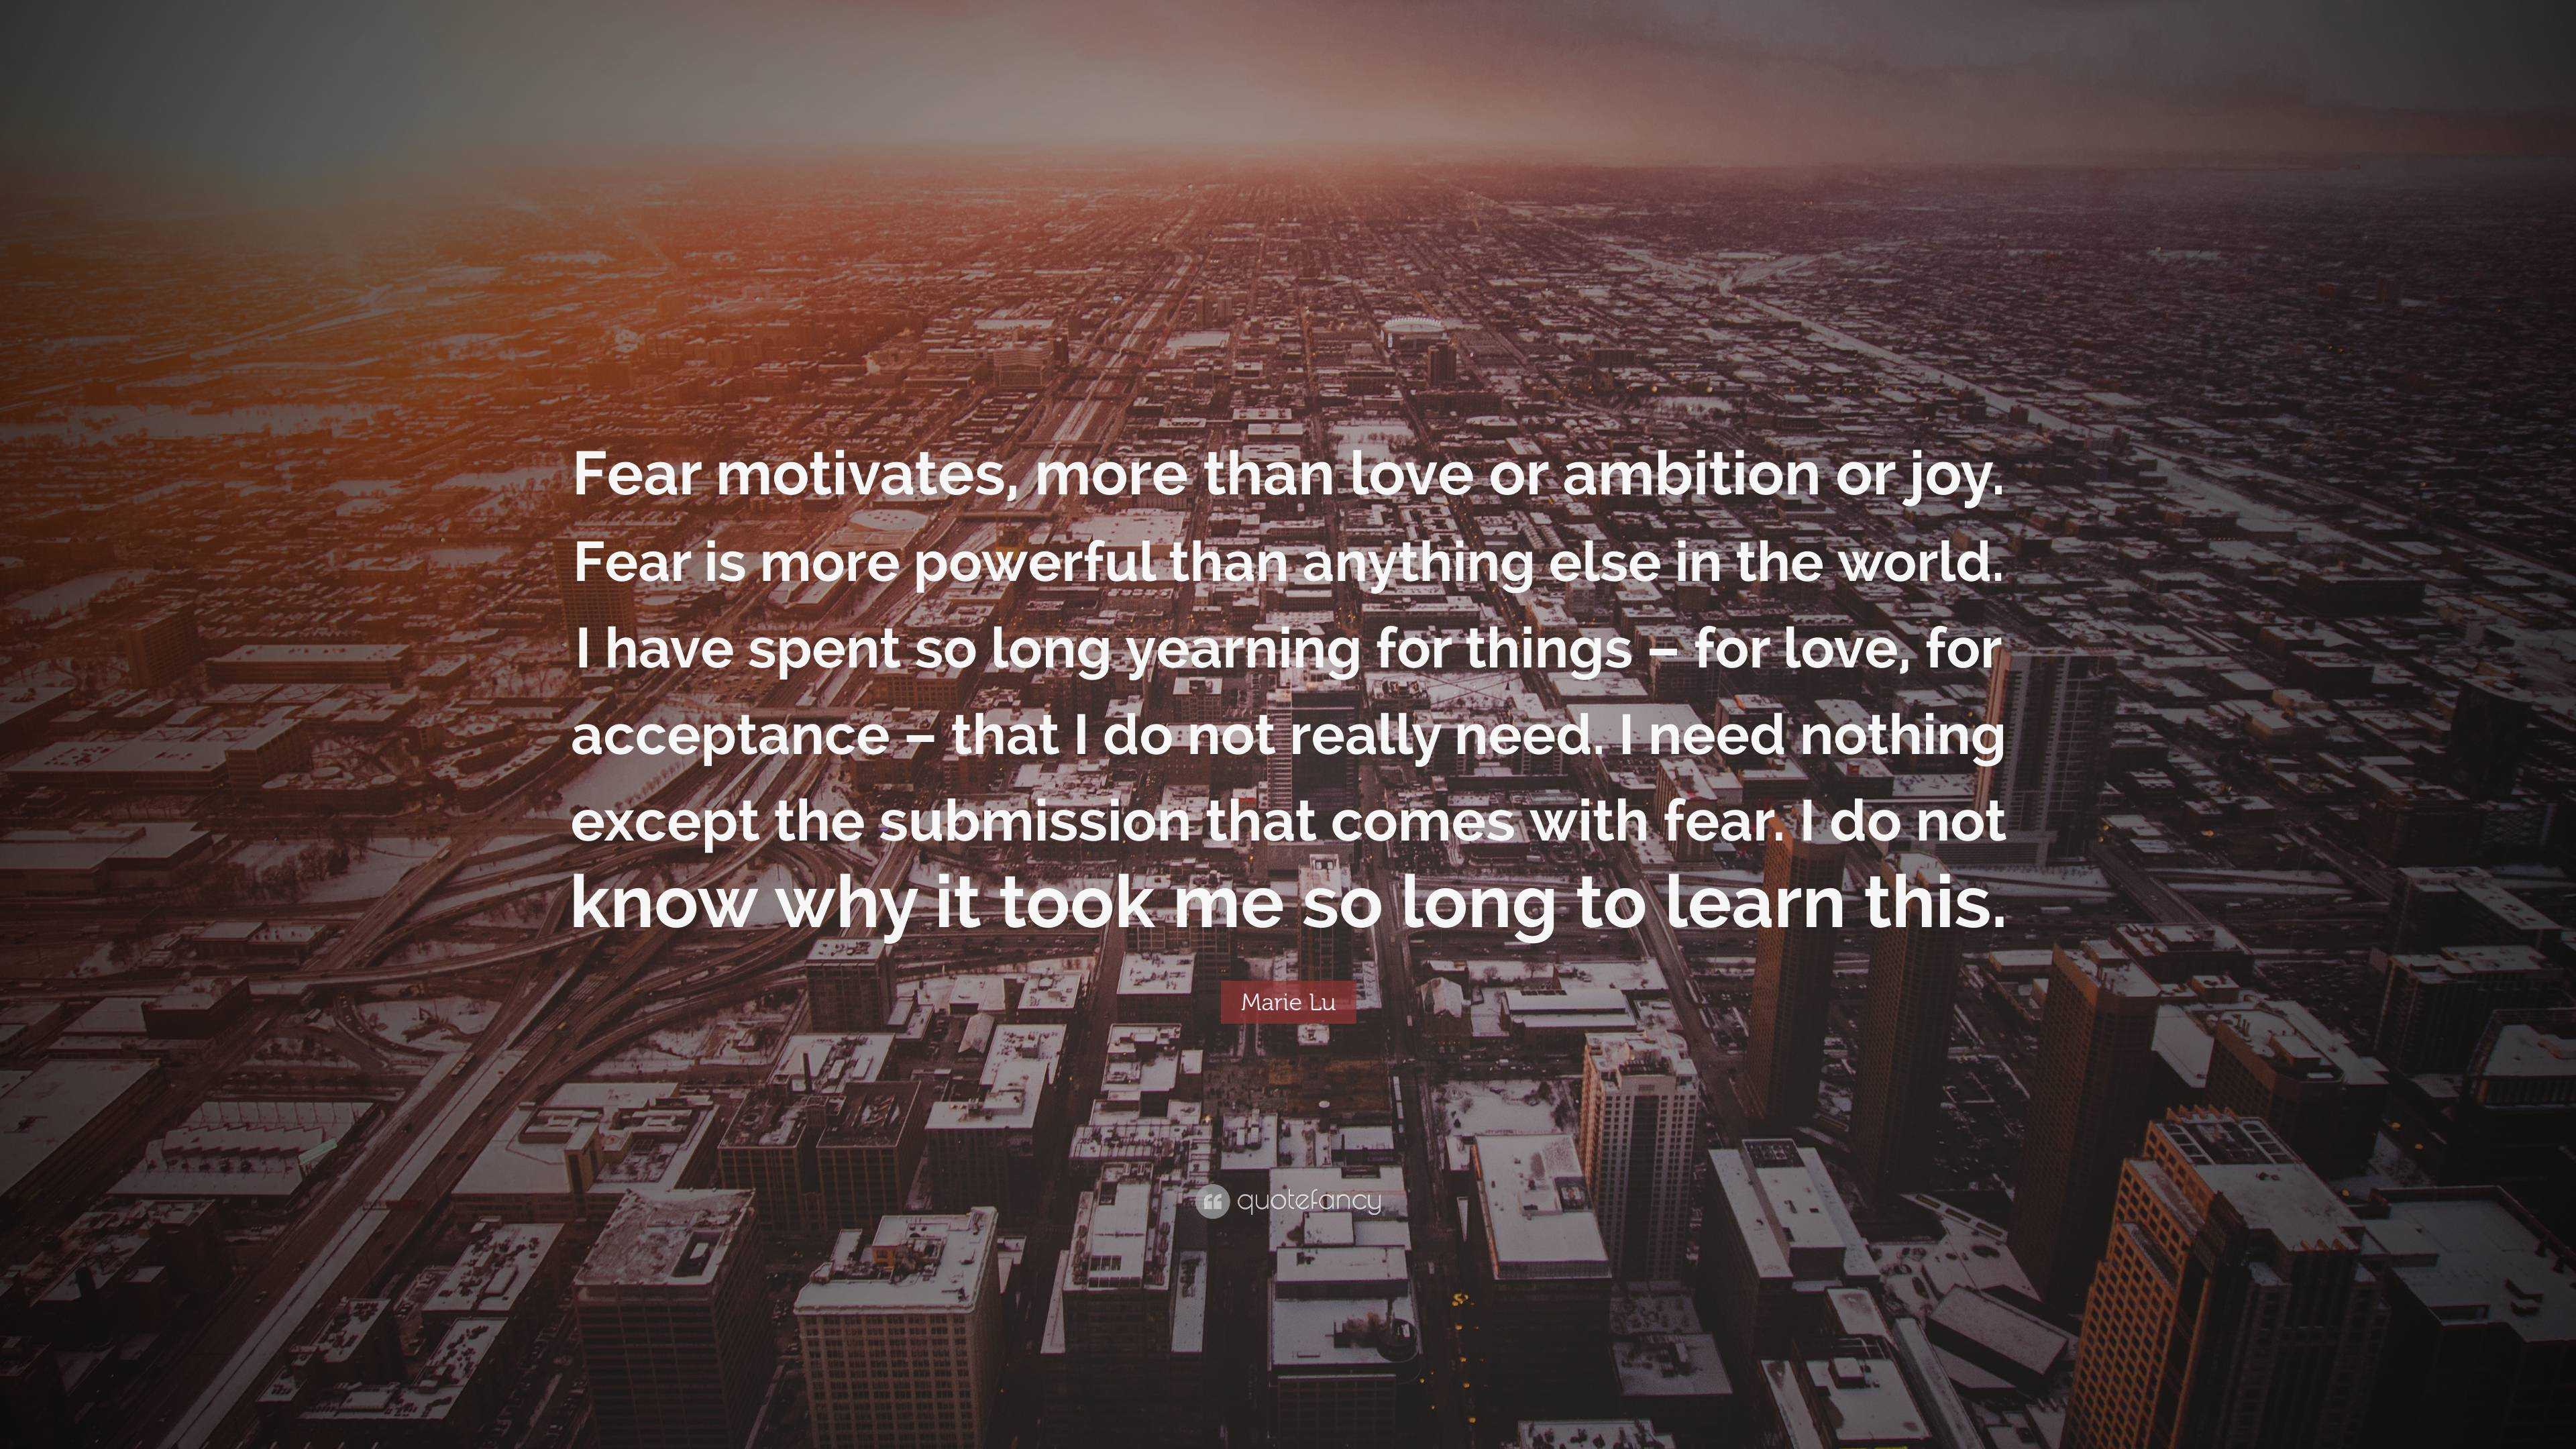 Marie Lu Quote: “Fear motivates, more than love or ambition or joy